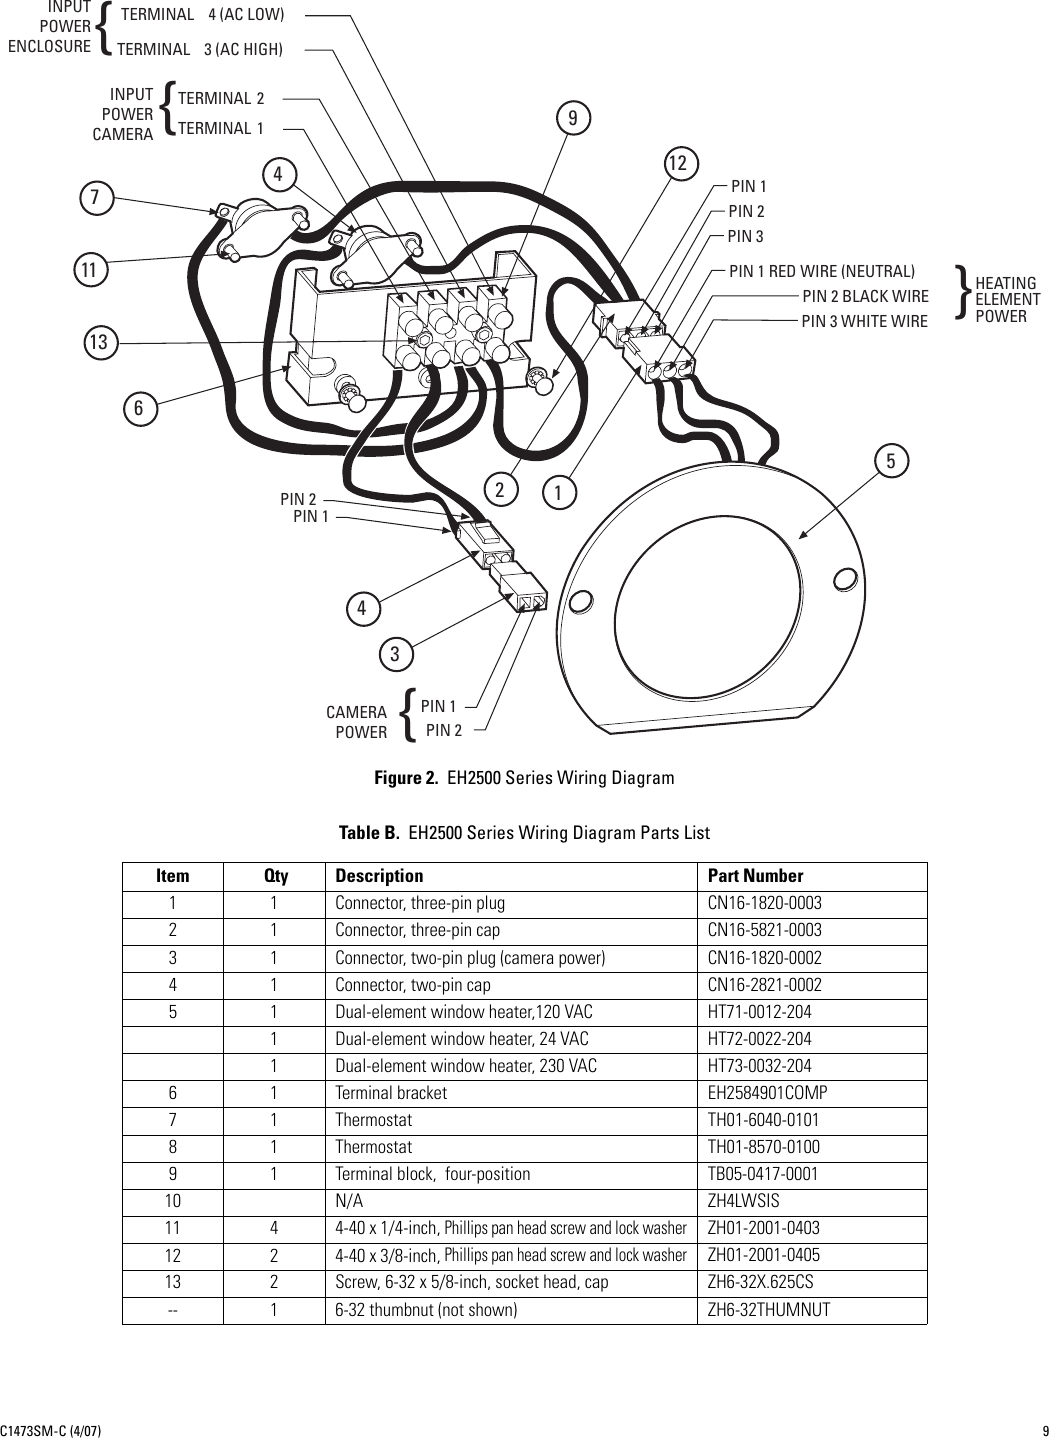 Pelco Spectra Iv Wiring Diagram from usermanual.wiki